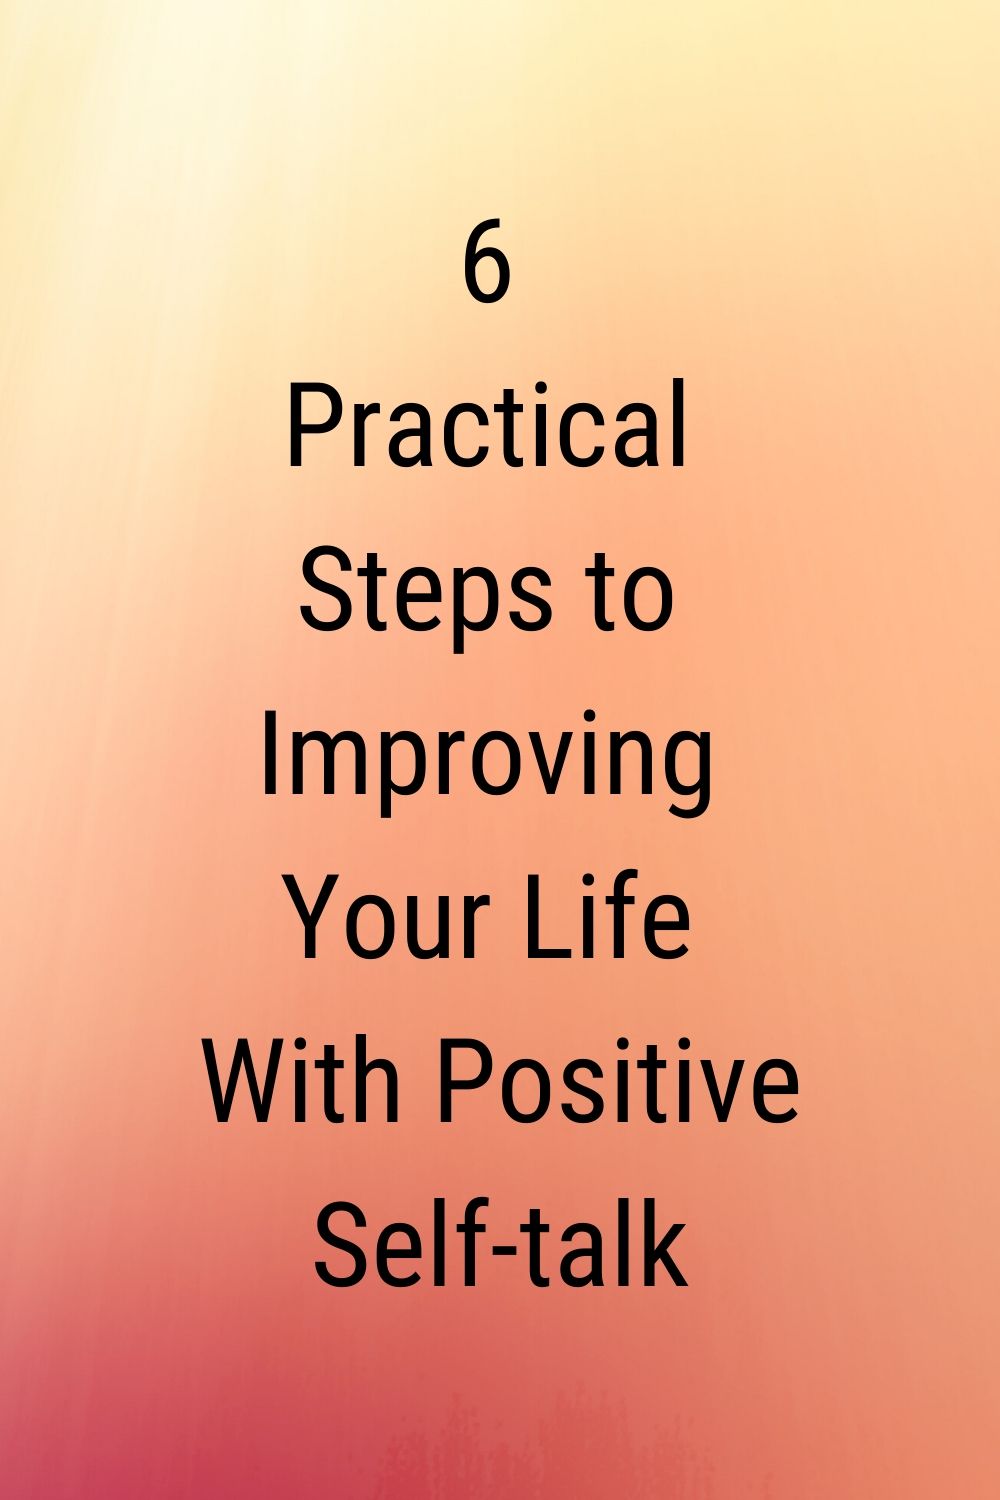 6 Practical Steps to Improving Your Life with Positive Self-Talk